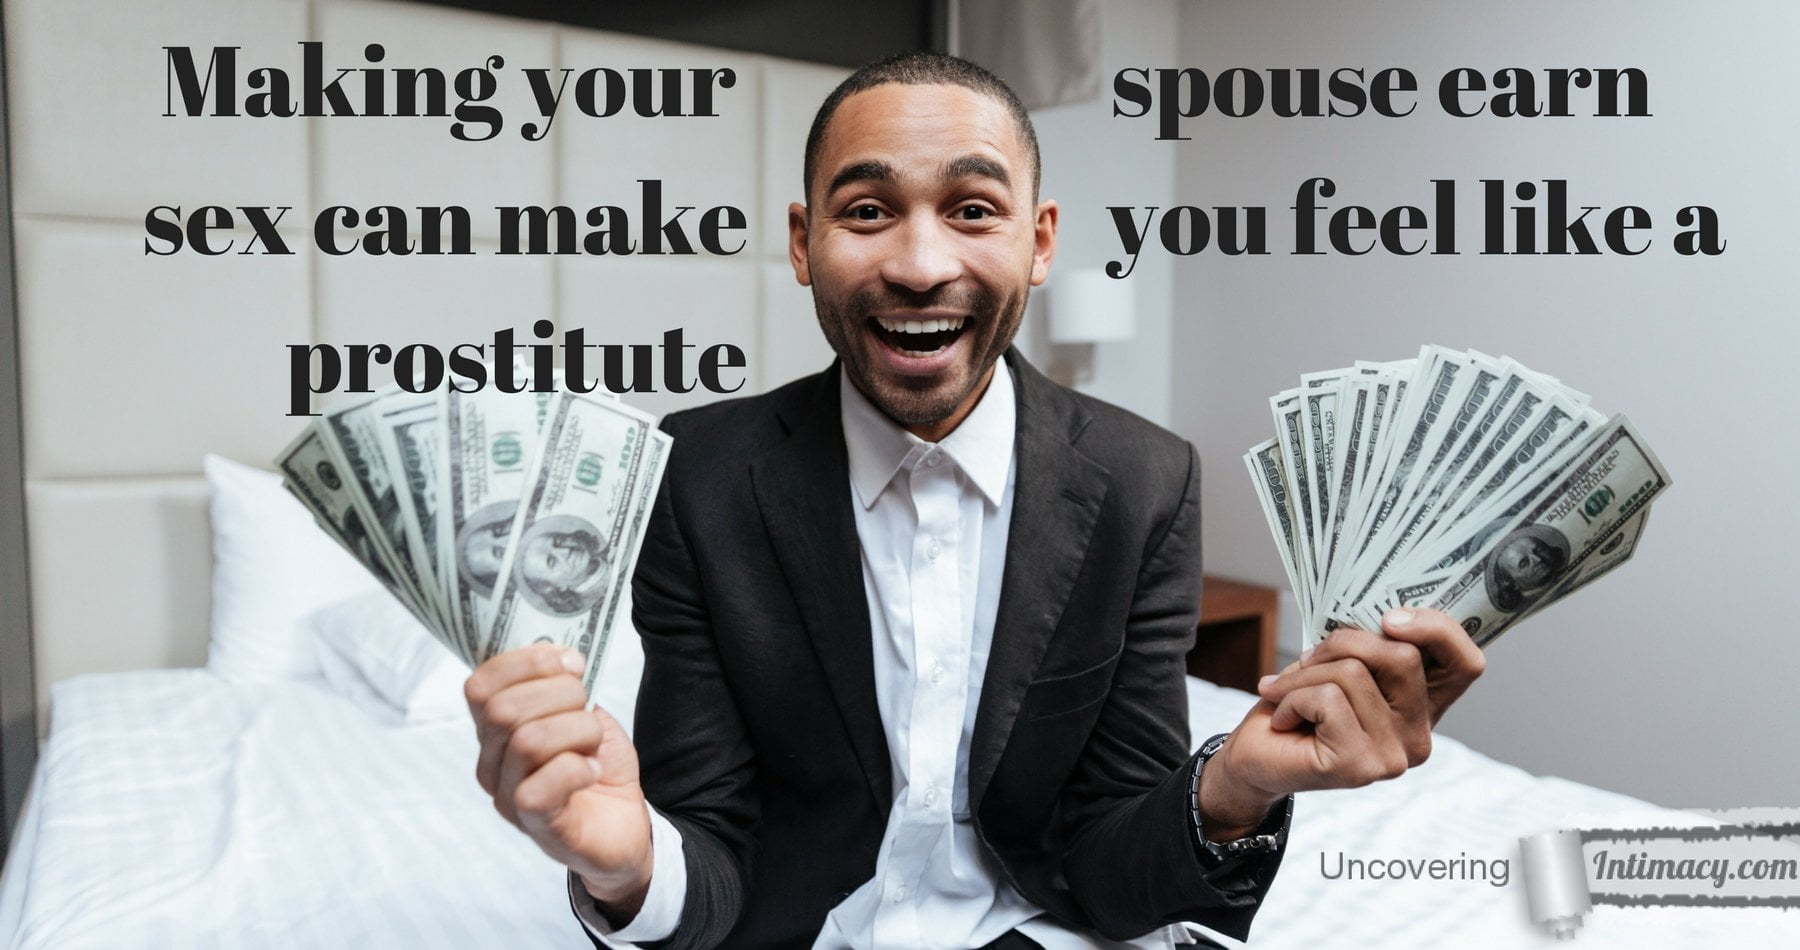 Making your spouse earn sex can make you feel like a prostitute